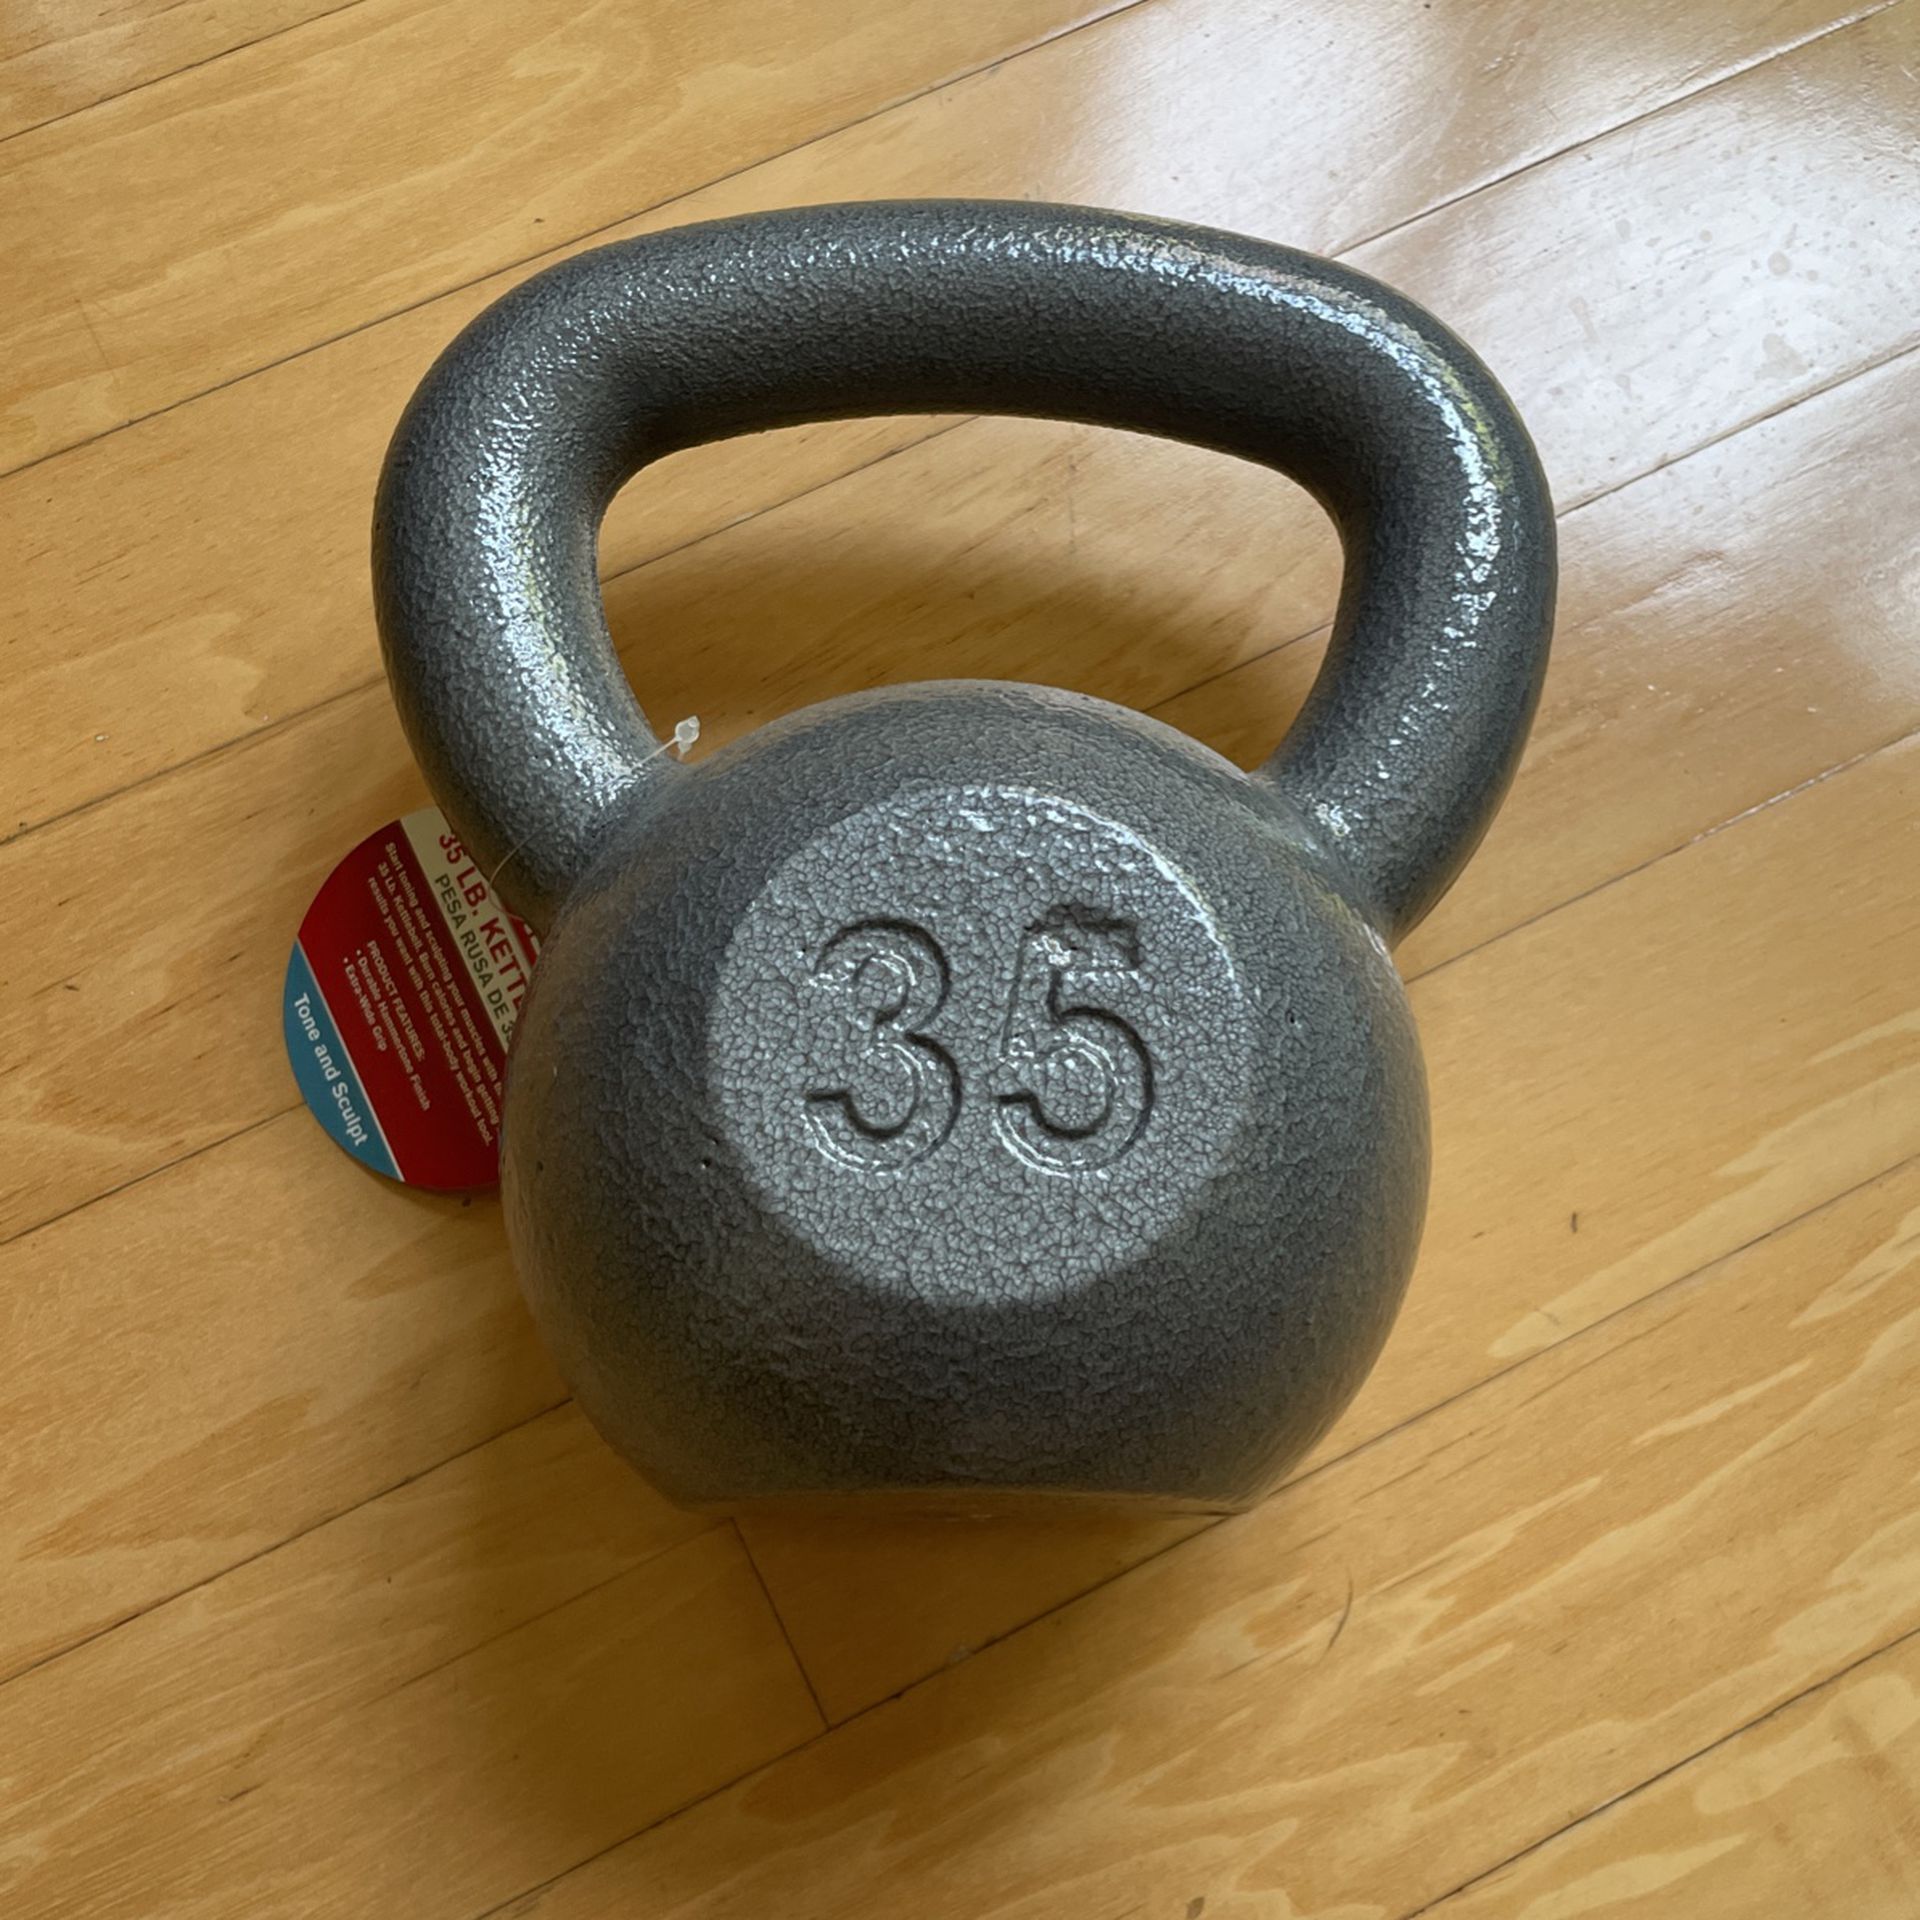 Weider 35 LB. Kettlebell Weight - NEW with TAGS - CASH ONLY - $40 FIRM